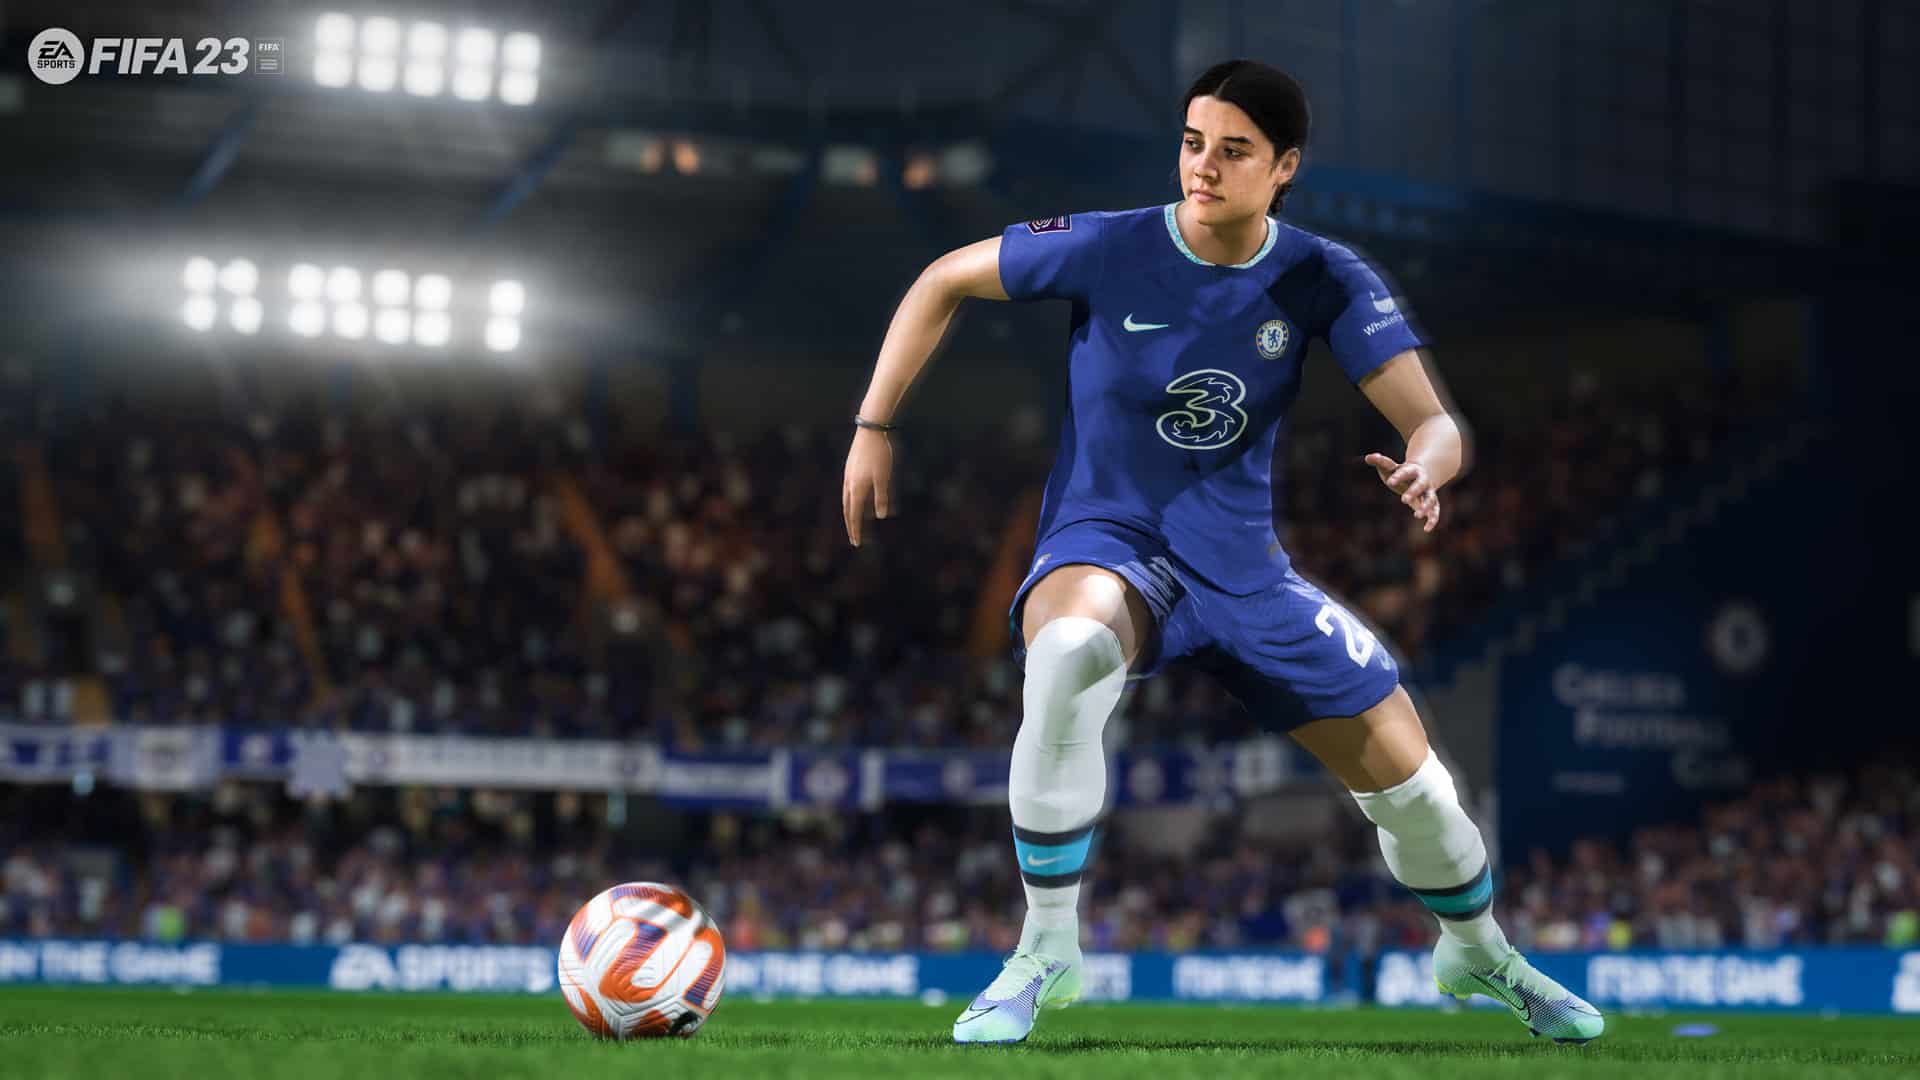 *LATEST* FIFA 23 closed beta release time – what’s included and how to download